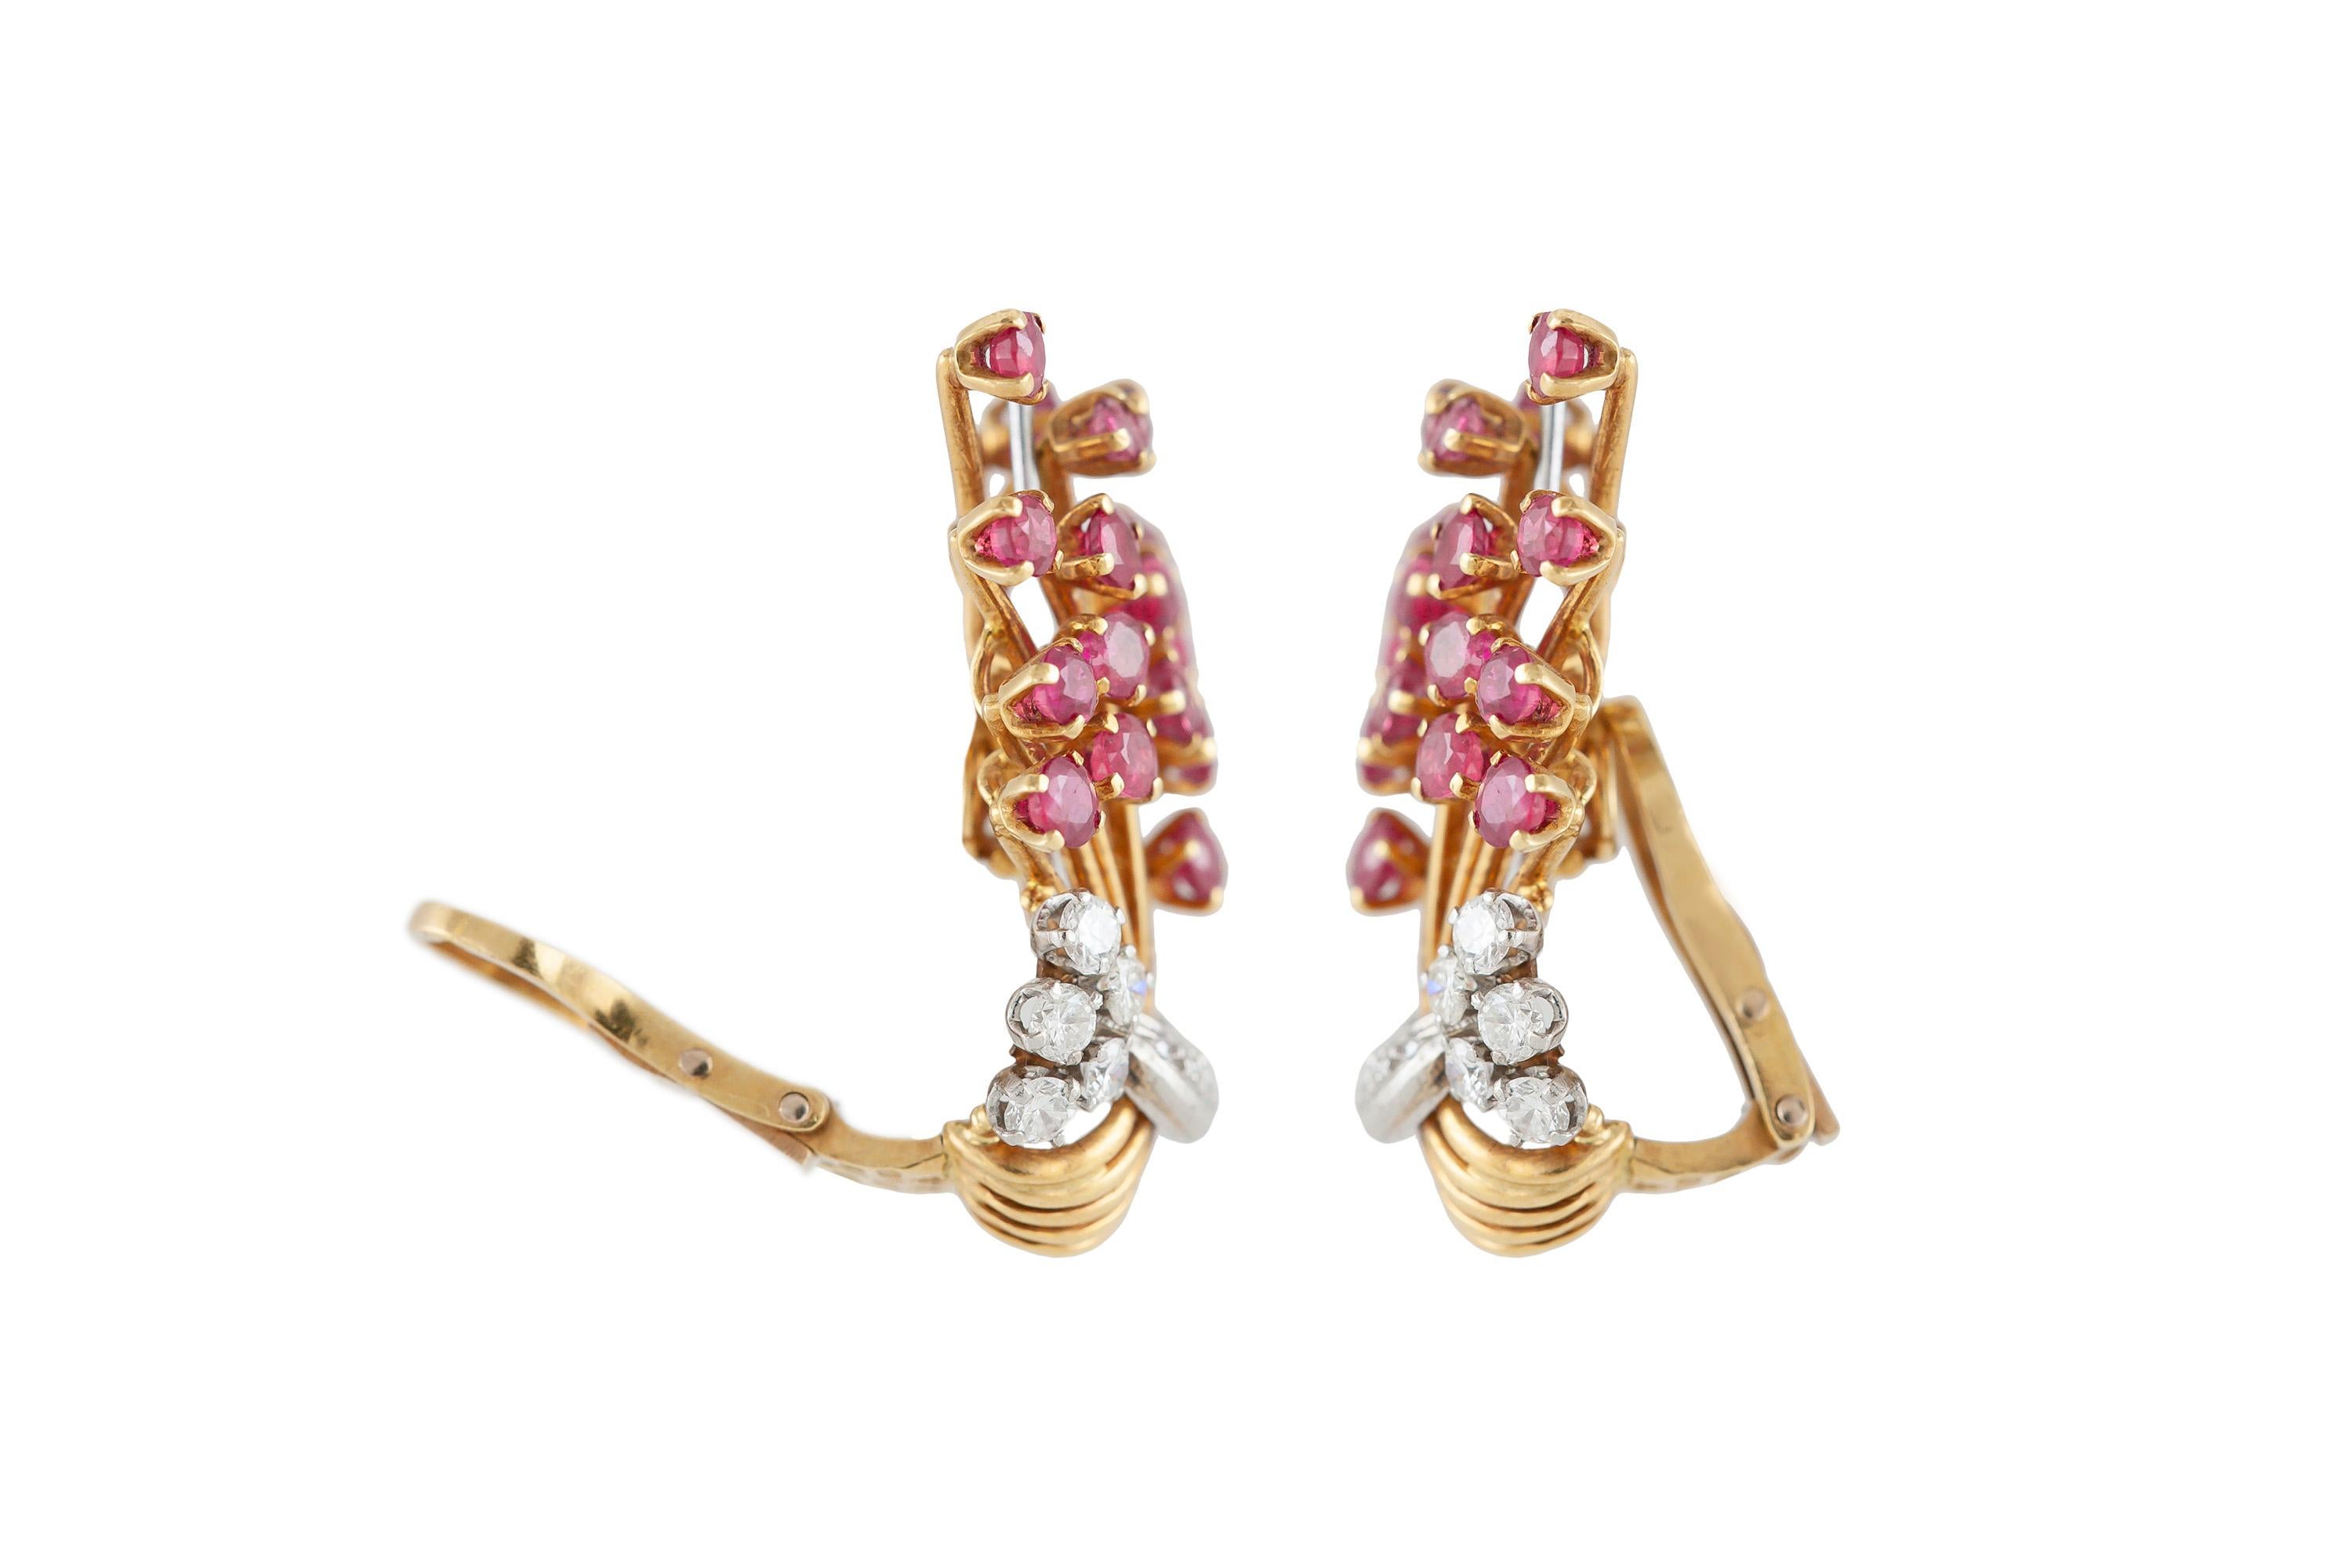 The earrings are finely crafted in 18k yellow gold with round rubies of 1.75 carat, and round and square diamonds weighing 1.25 carat. 
Circa 1930.

